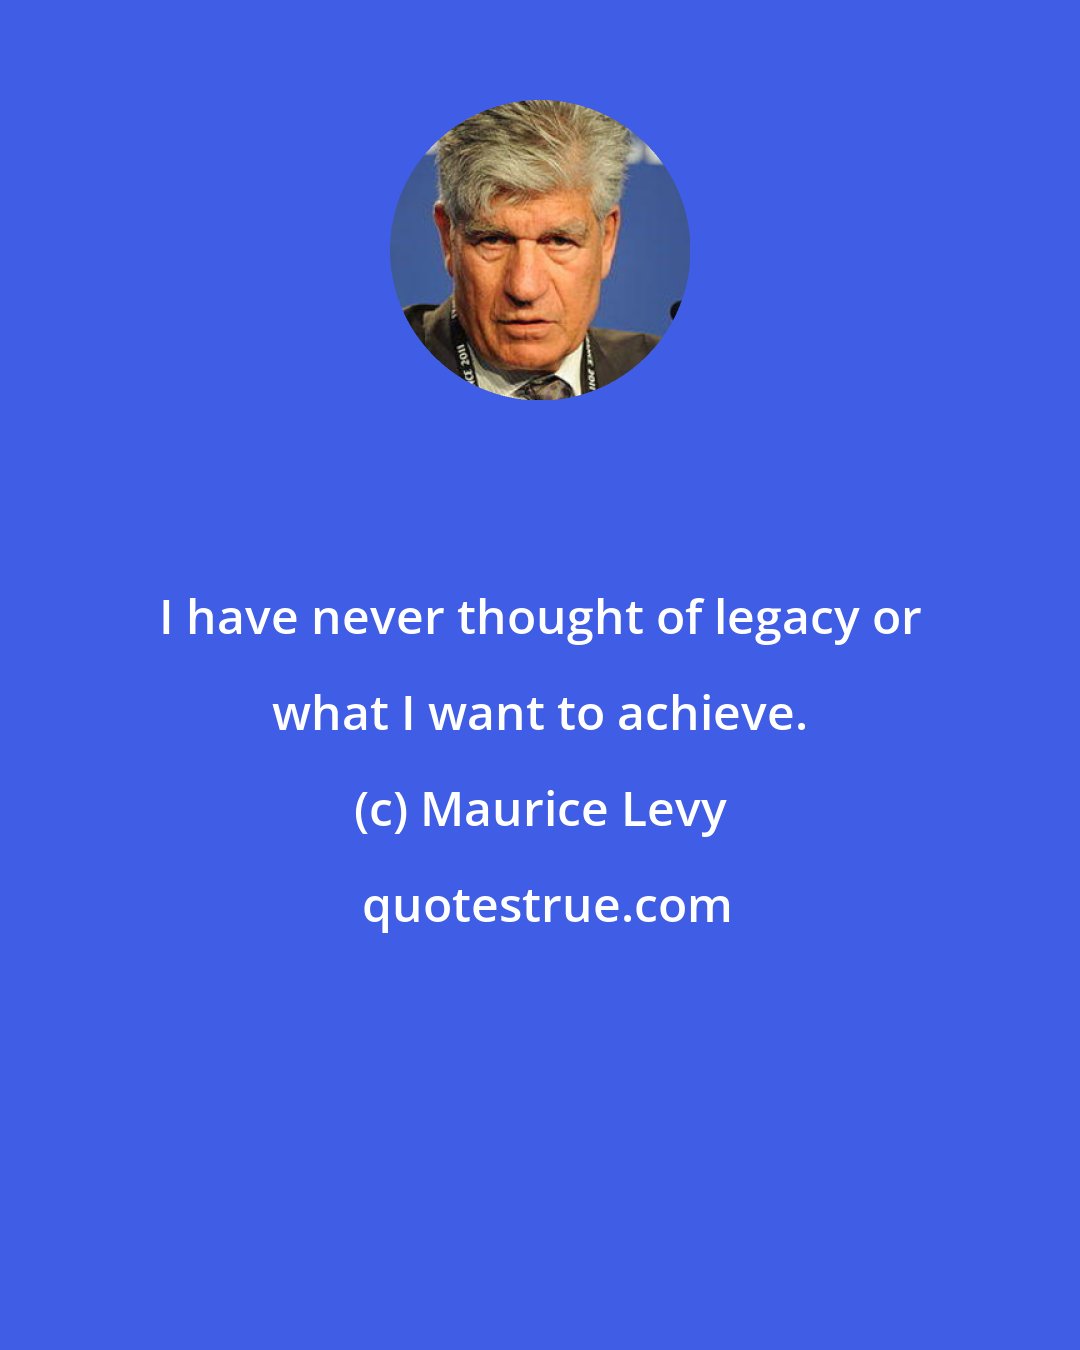 Maurice Levy: I have never thought of legacy or what I want to achieve.